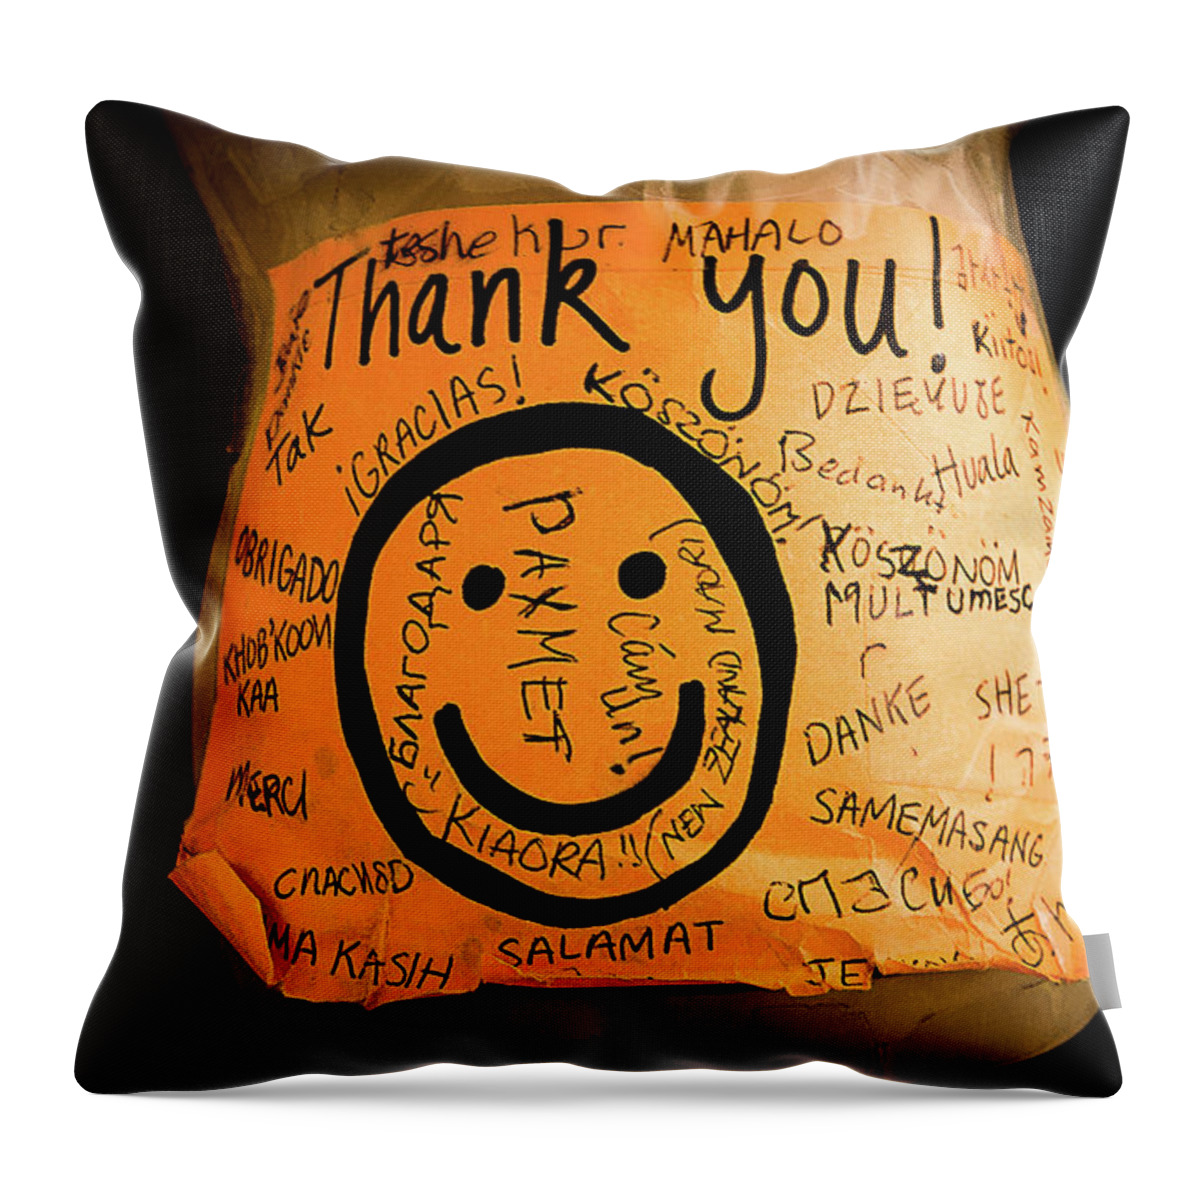 Thank You Tip Jar Throw Pillow featuring the photograph Thank You Tip Jar by David Morehead